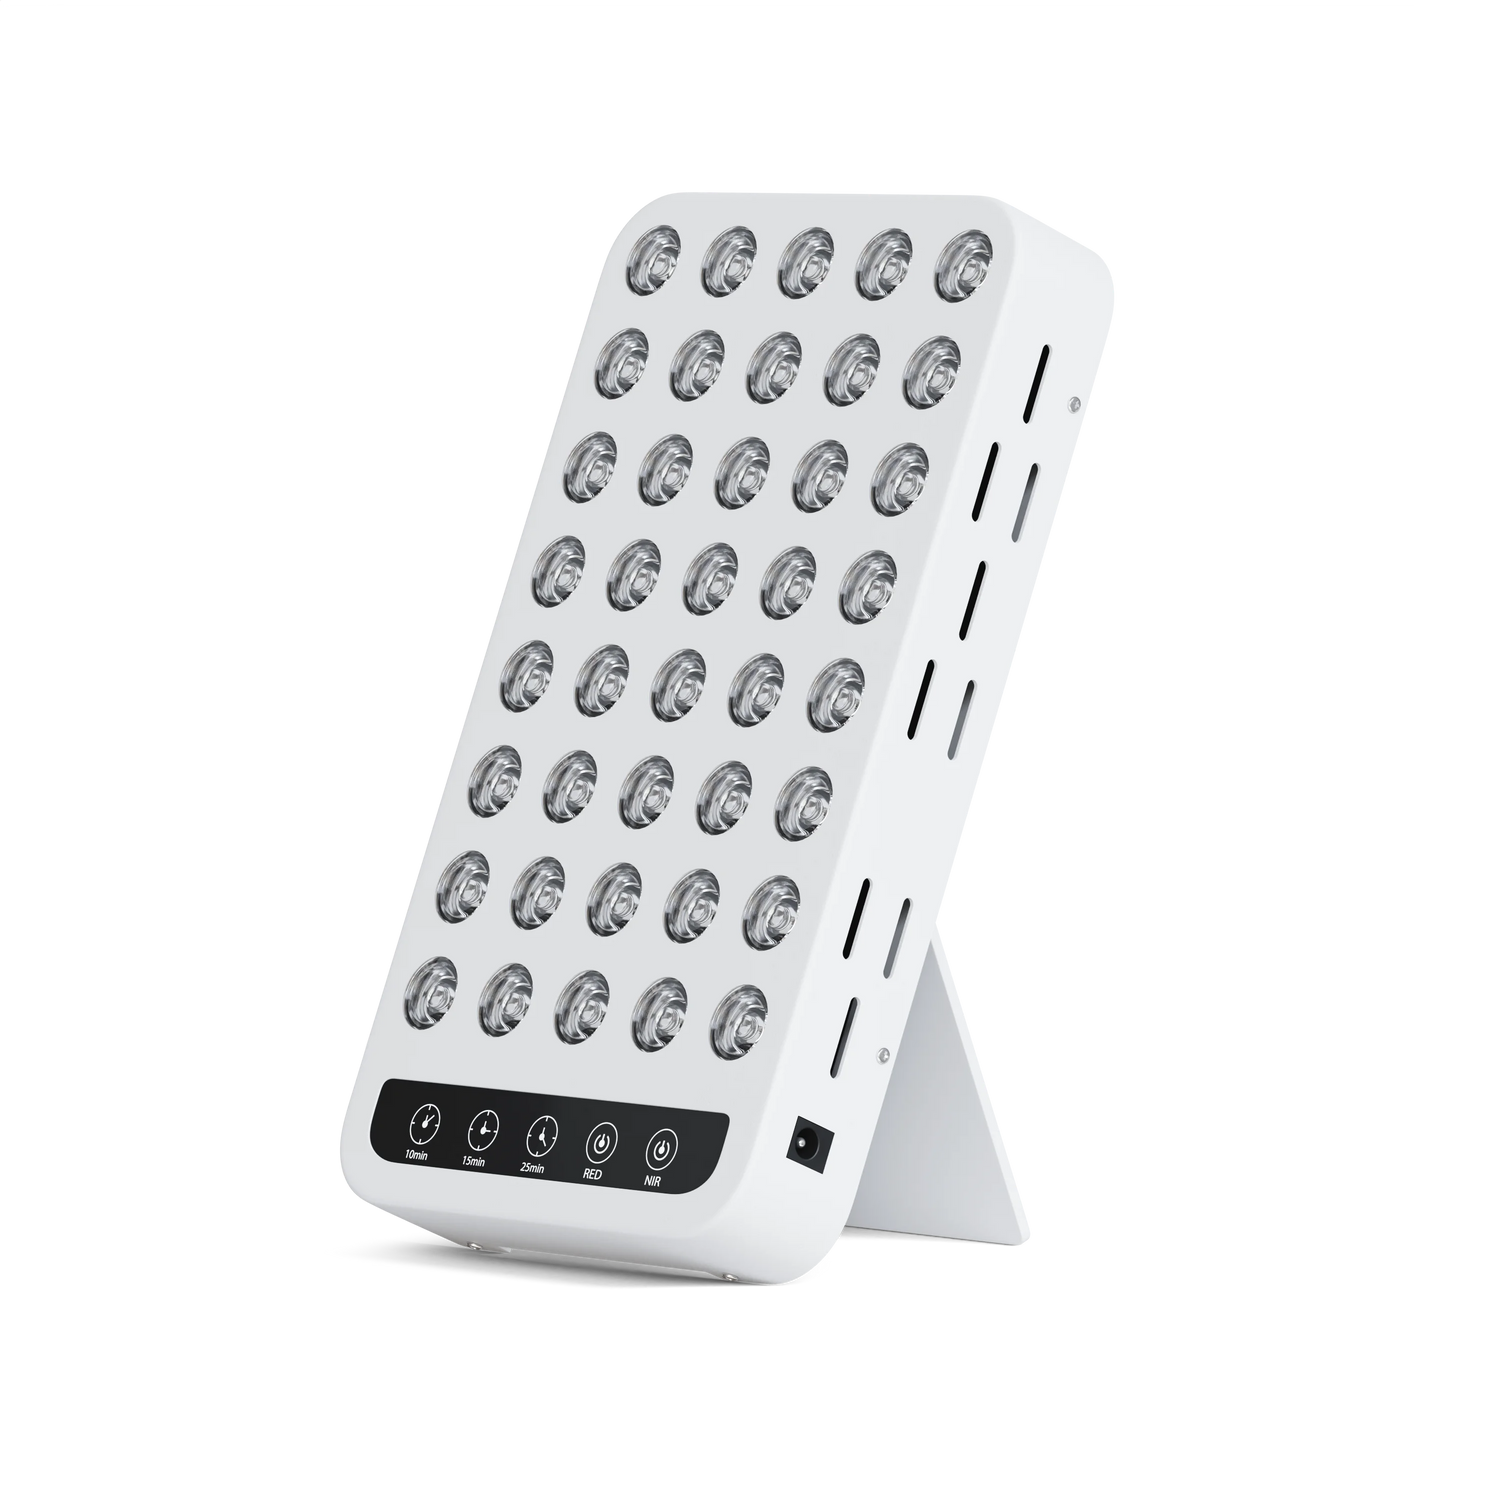 SOHL MOVE Red Light Therapy Panel